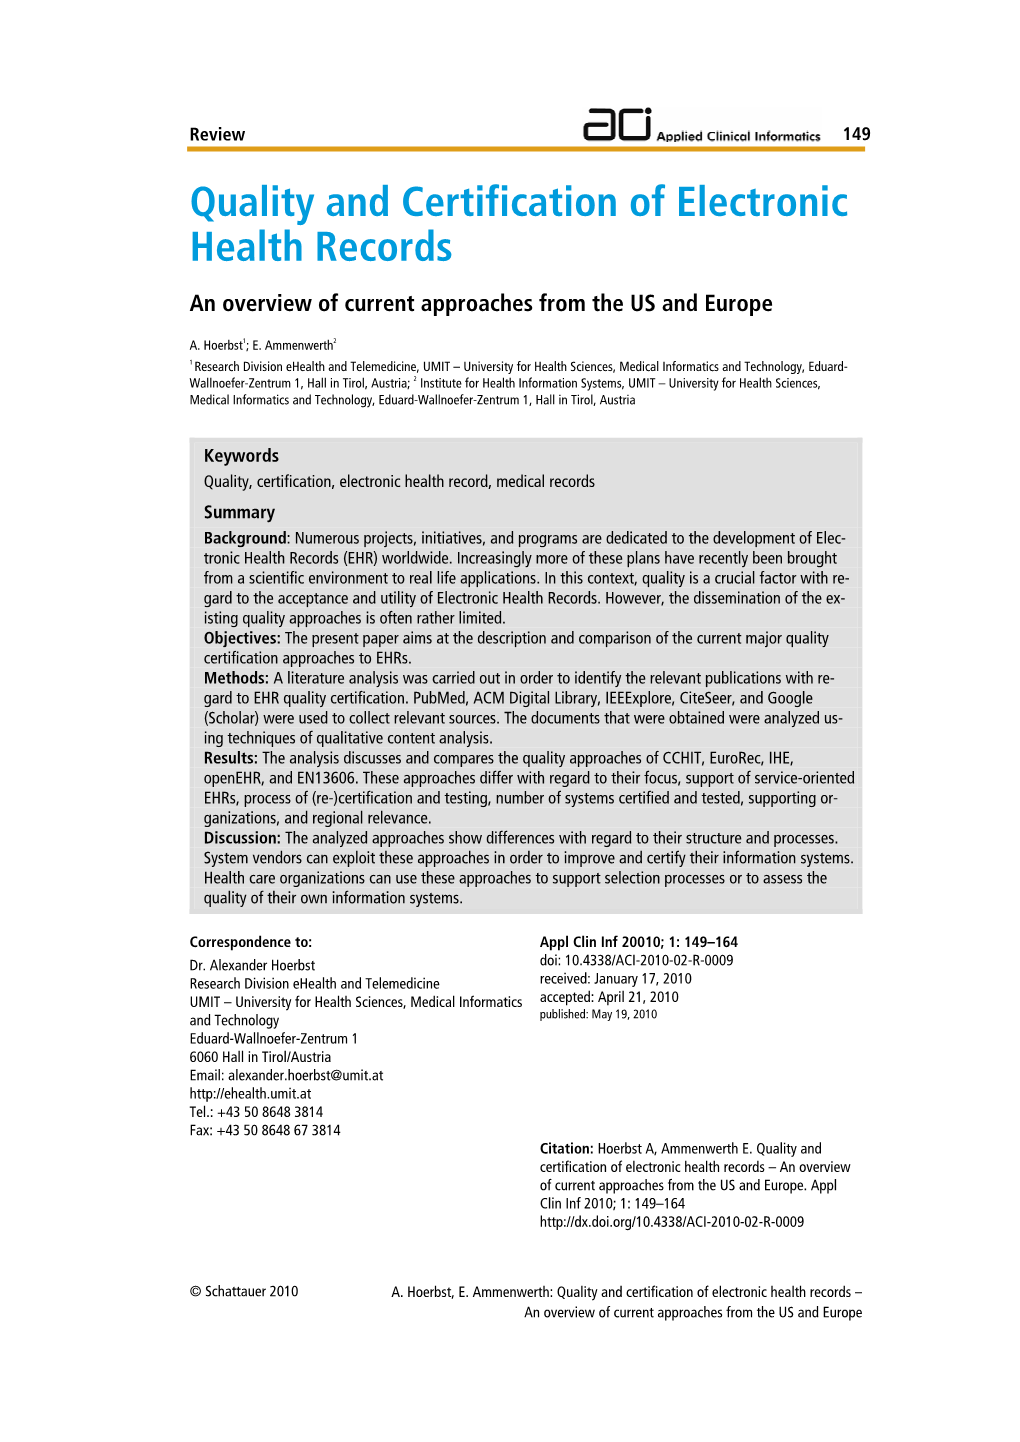 Quality and Certification of Electronic Health Records an Overview of Current Approaches from the US and Europe